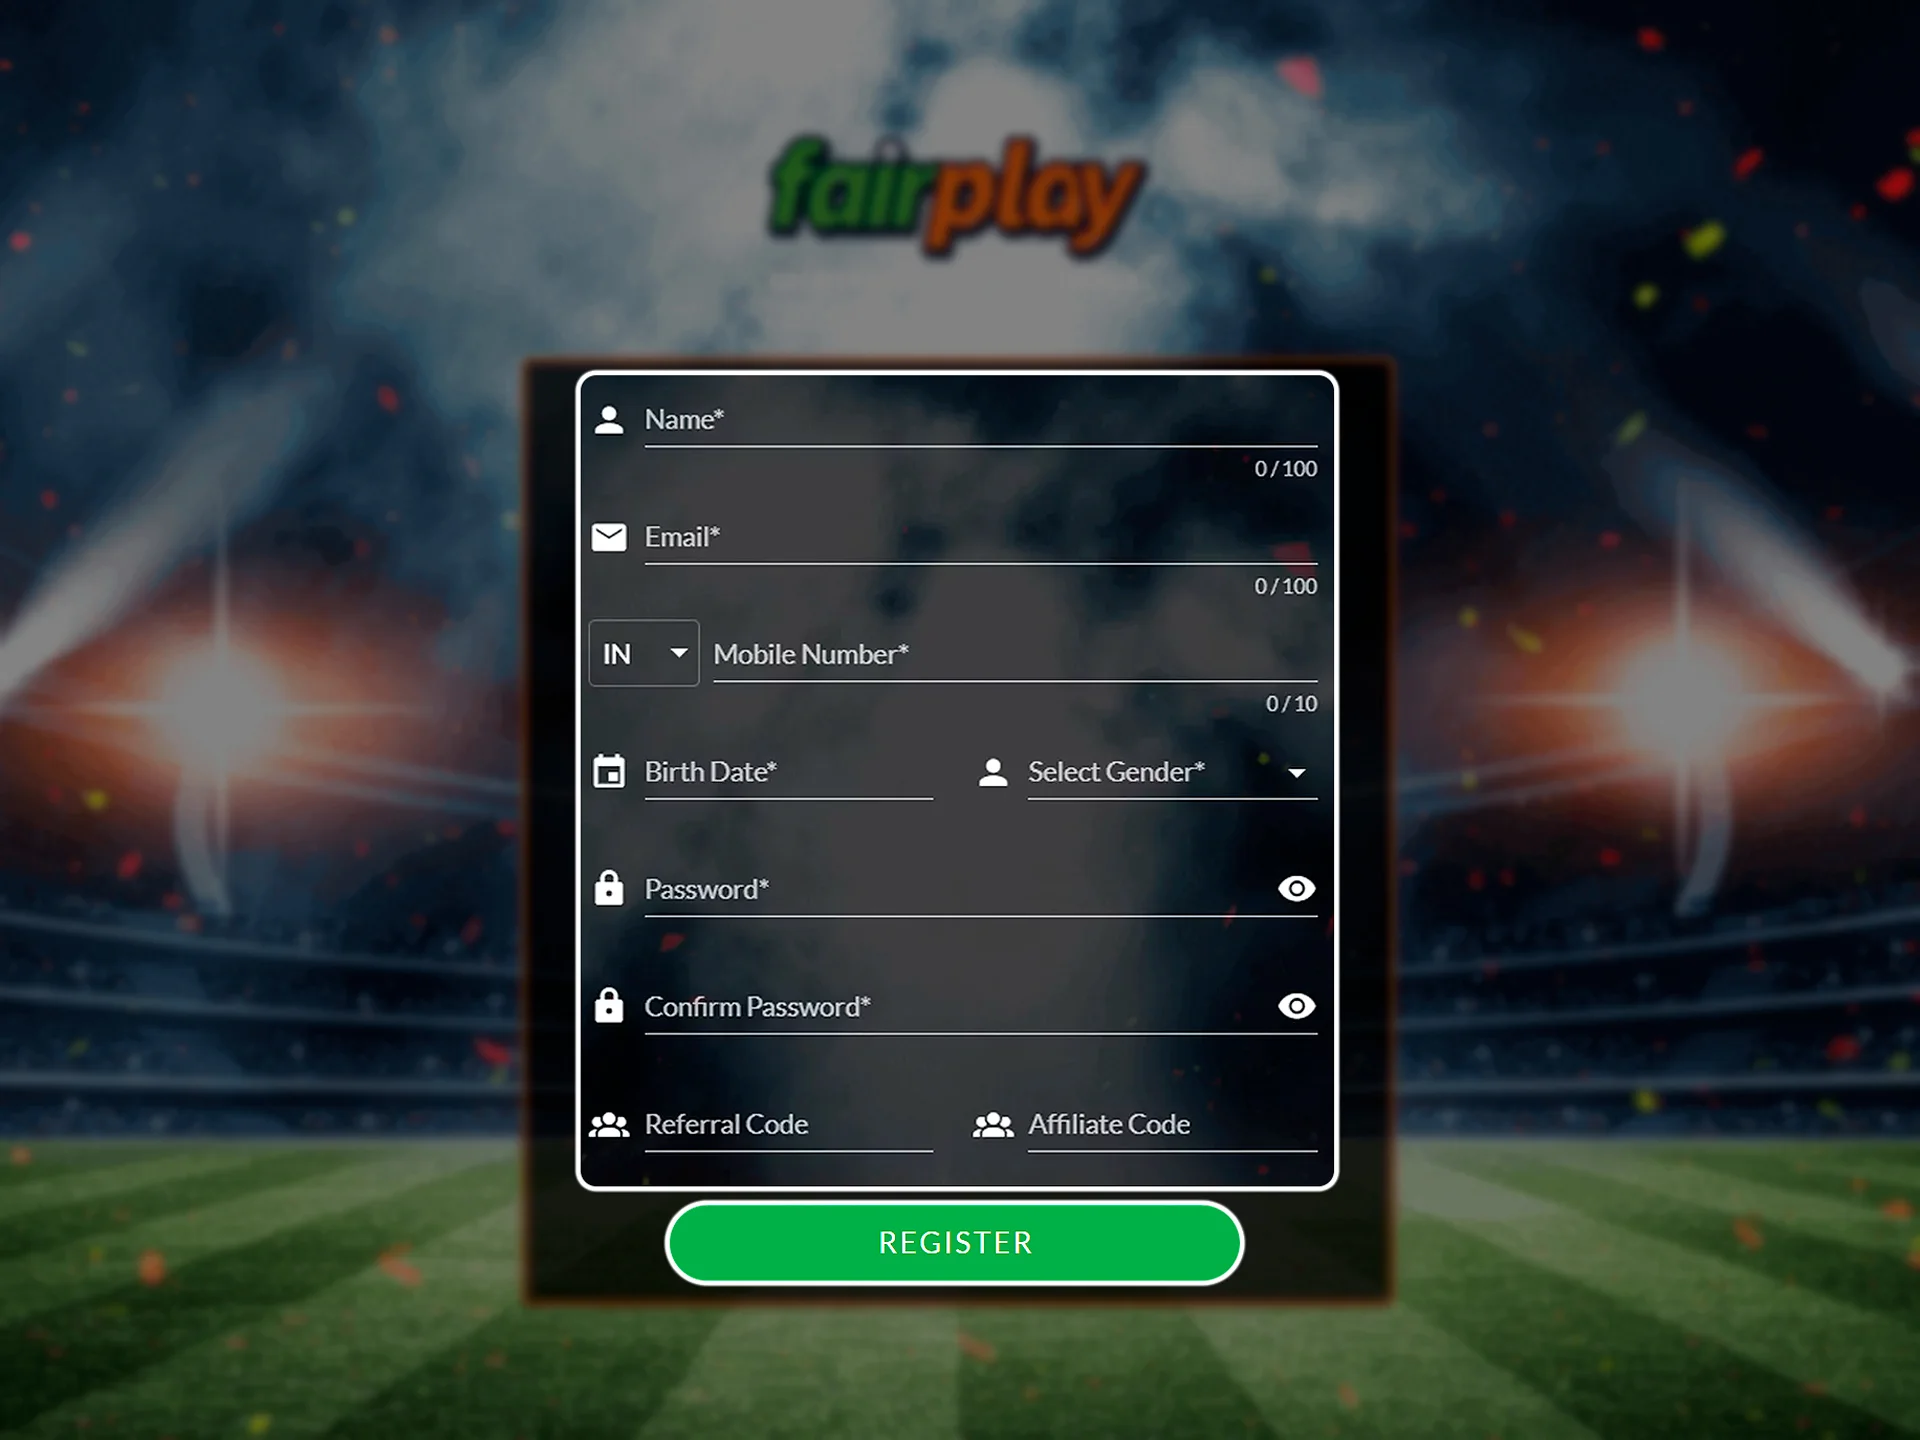 Go to the Fairplay website and fill out the form to become a registered user.